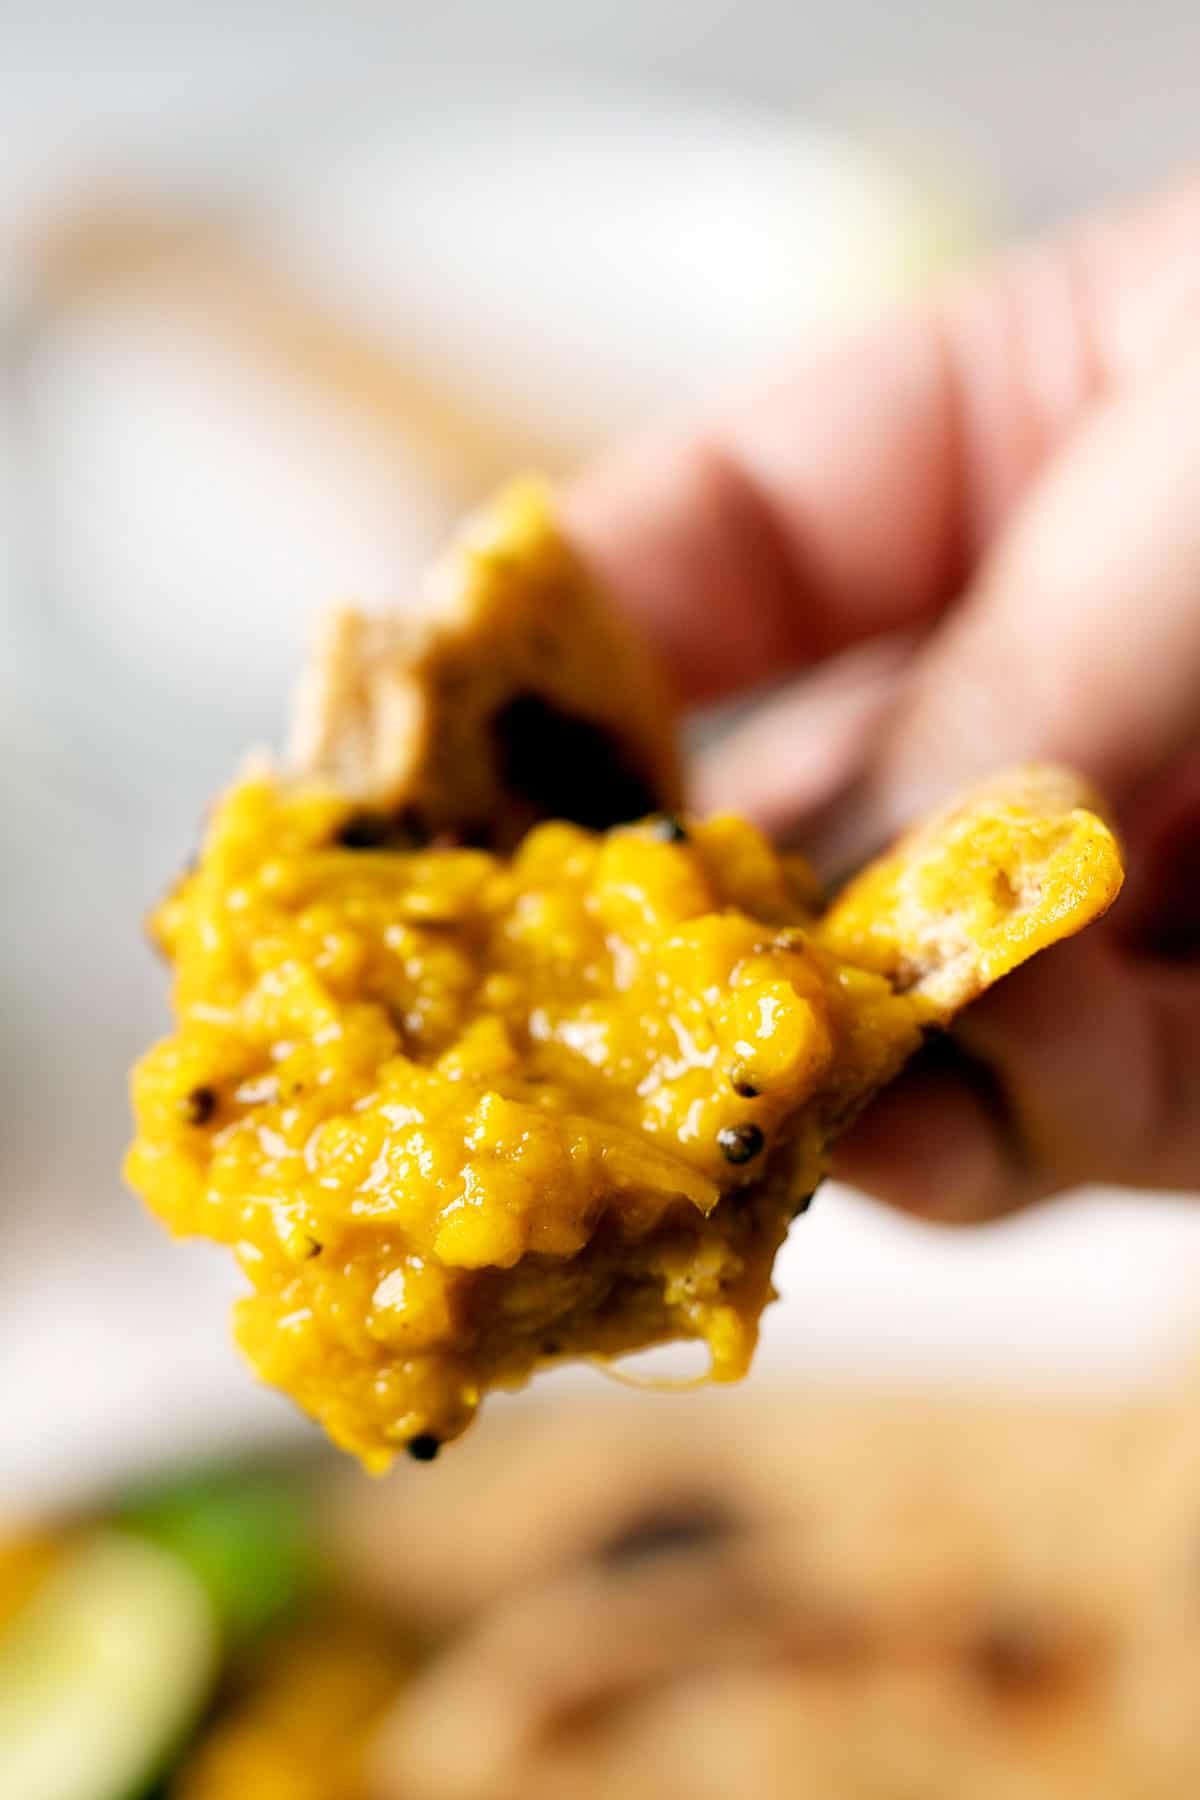 Holding a piece of flatbread dipper in lentils turmeric curry